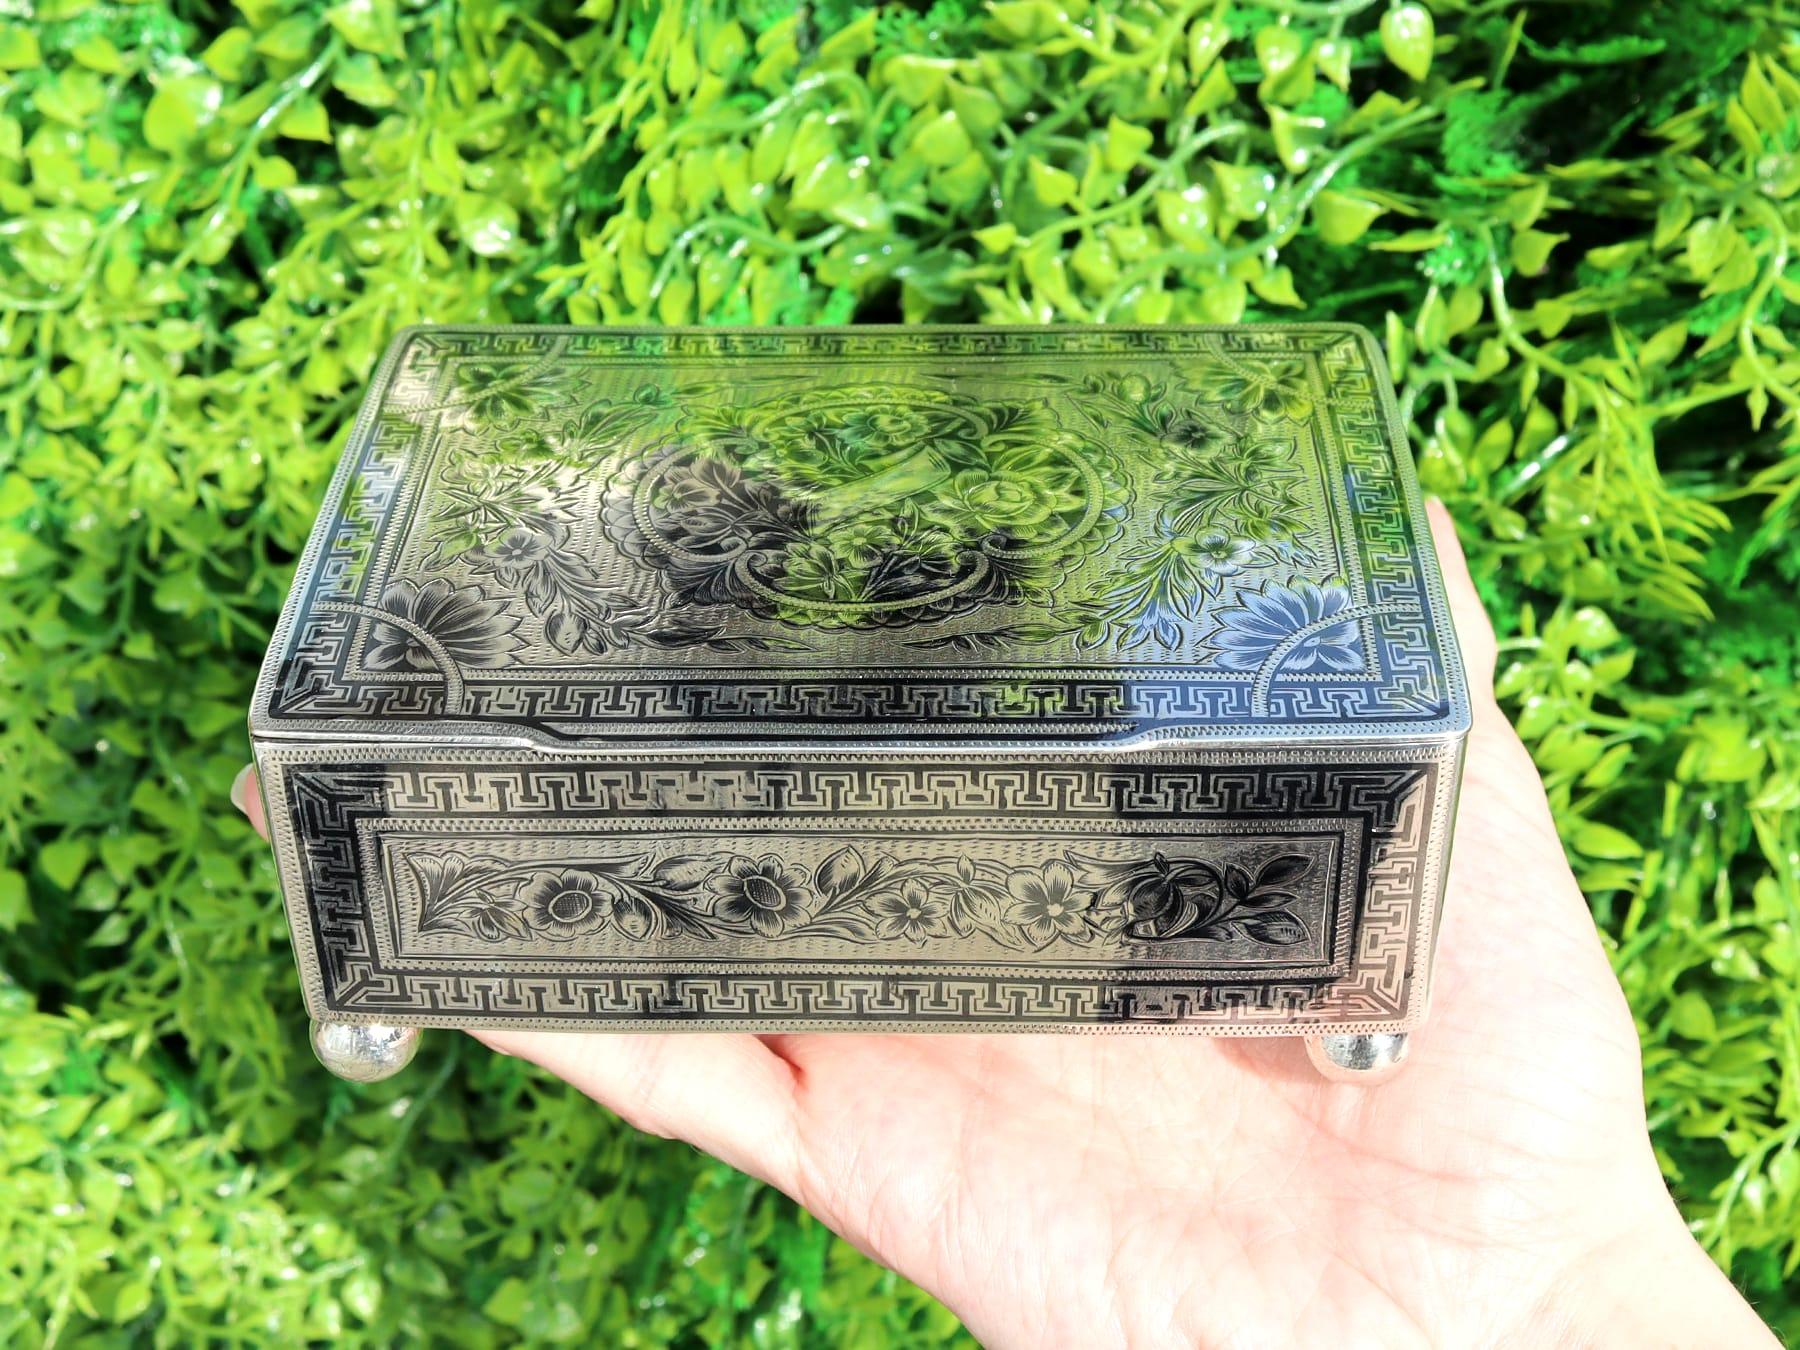 An exceptional, fine and impressive antique silver and niello enamel box; an addition to our diverse silverware collection

This exceptional antique Persian silver box has a rectangular form, supported with four plain ball feet.

The body of this